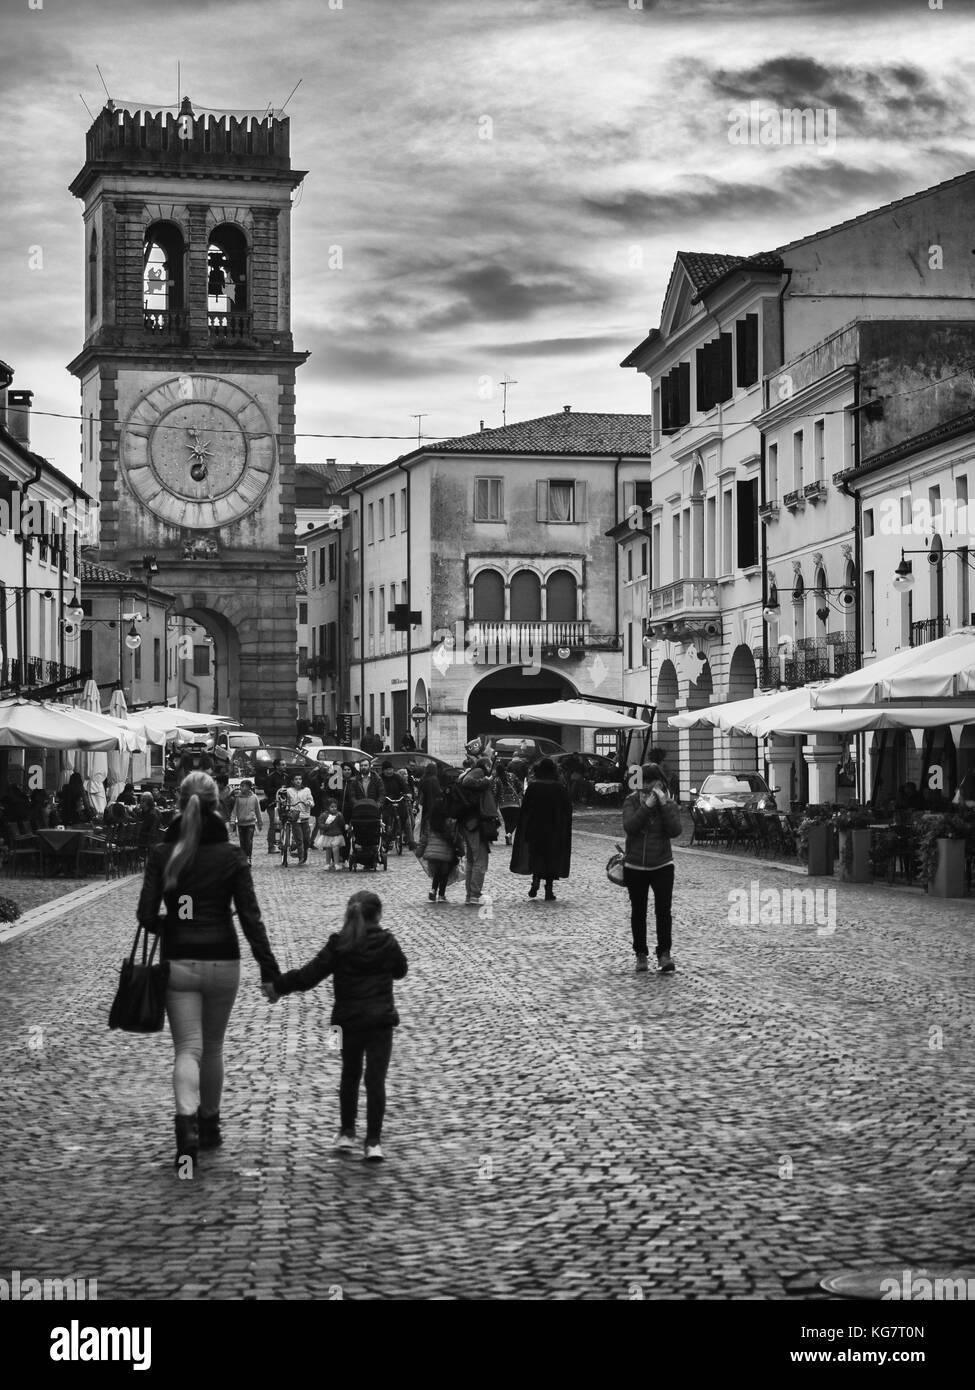 Este, Italy - October 28, 2017: Historic Center of Este with characteristic clock tower. Stock Photo